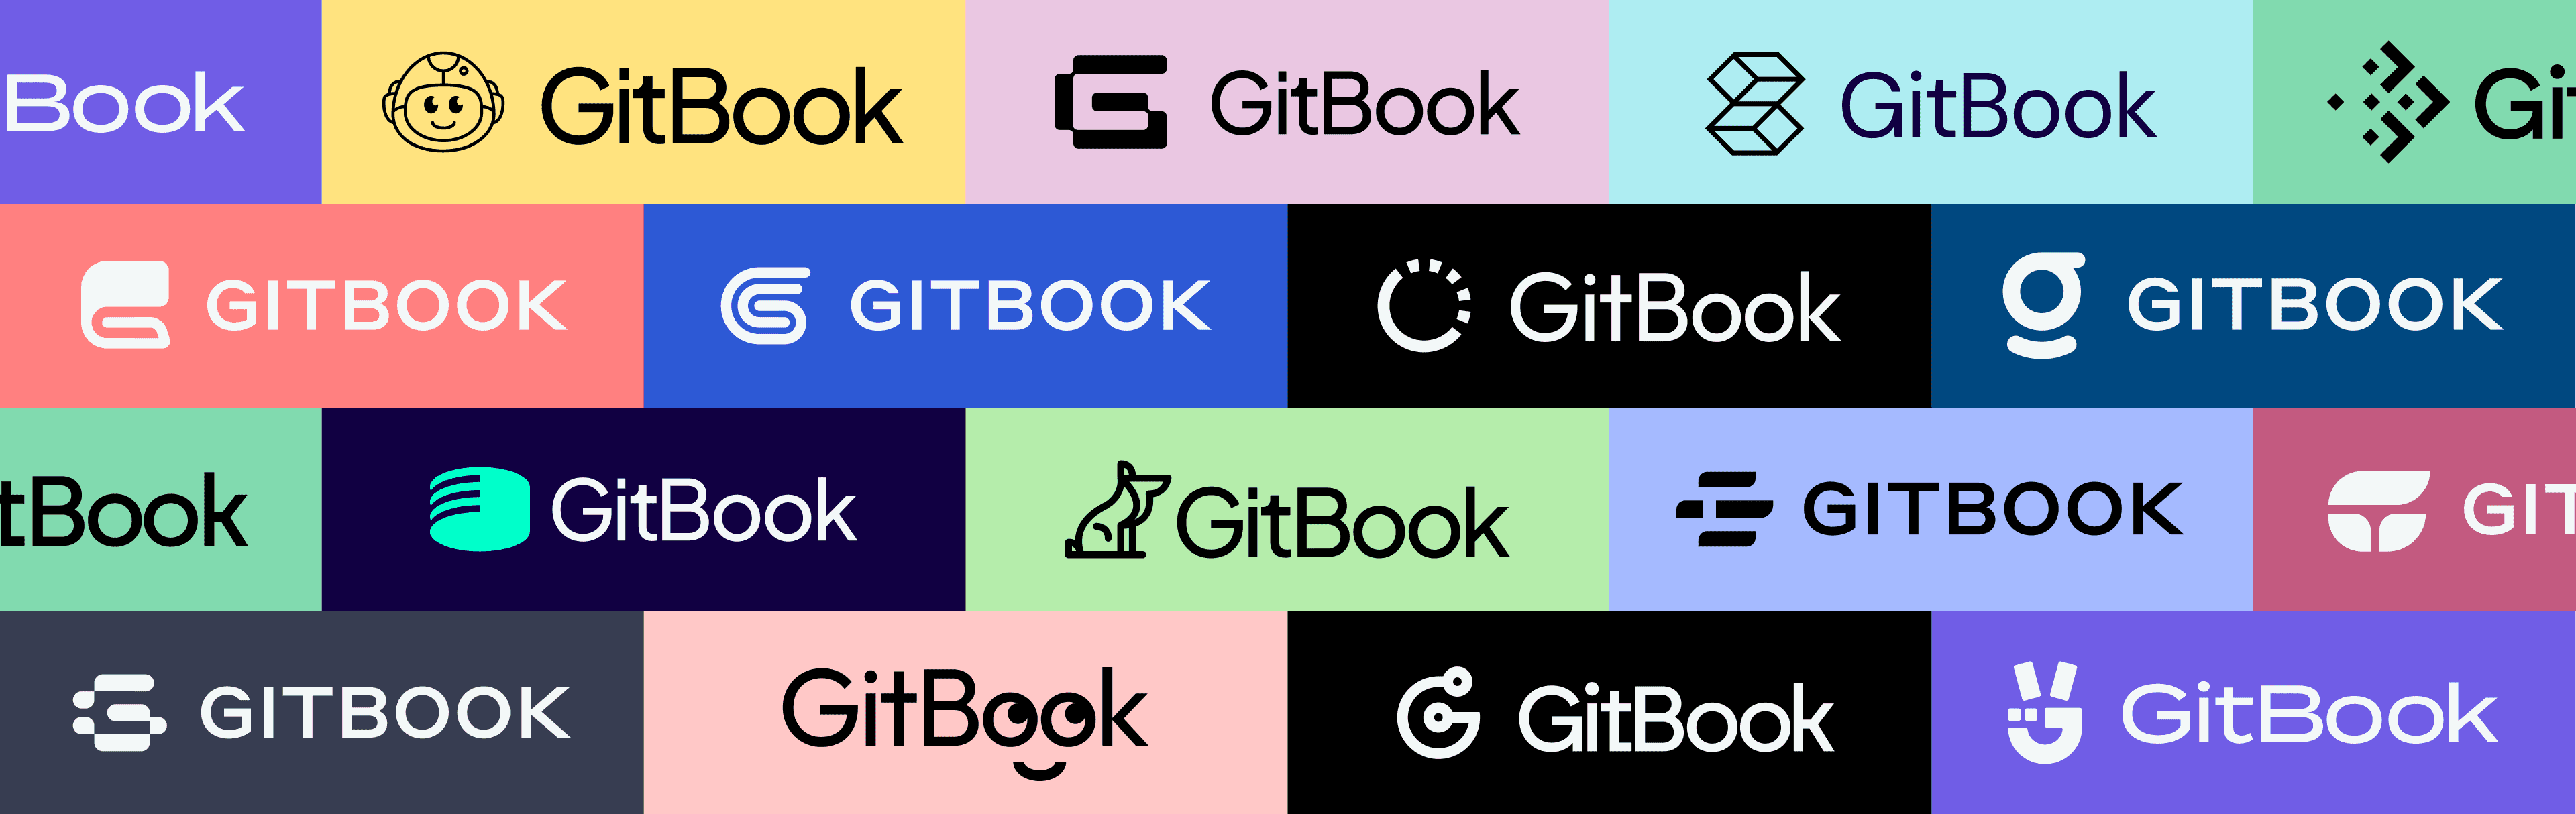 A grid of different logos and GitBook word marks on different colored backgrounds